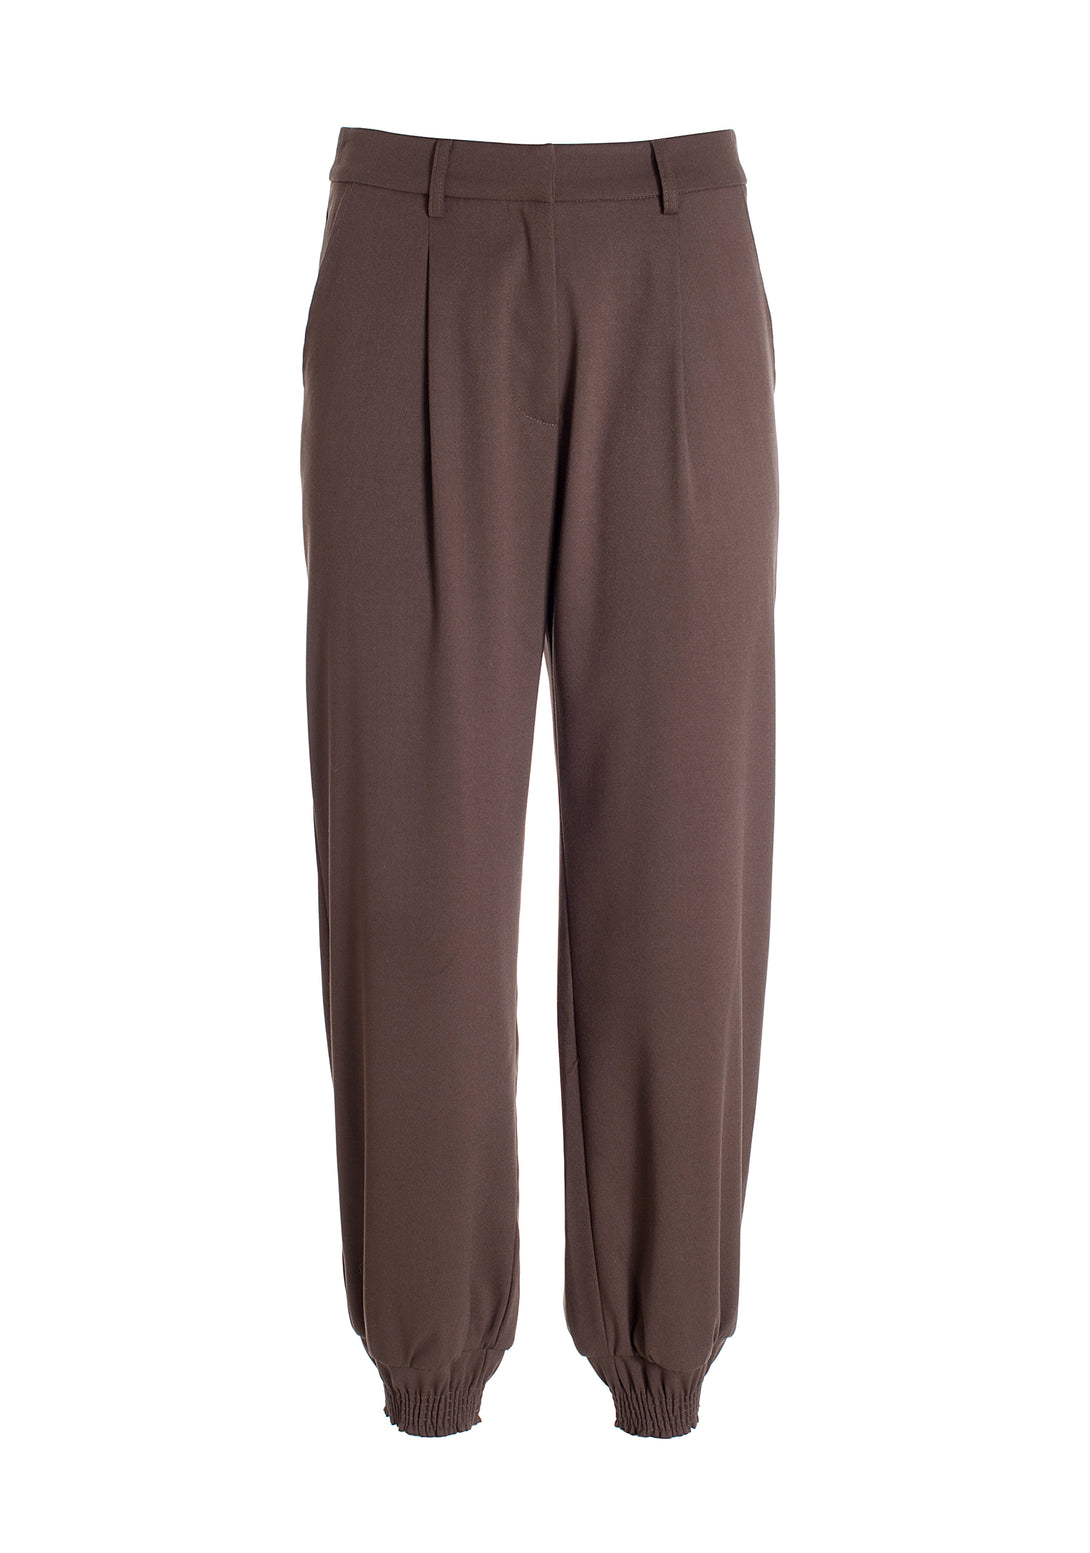 Pant regular fit with tight bottom leg